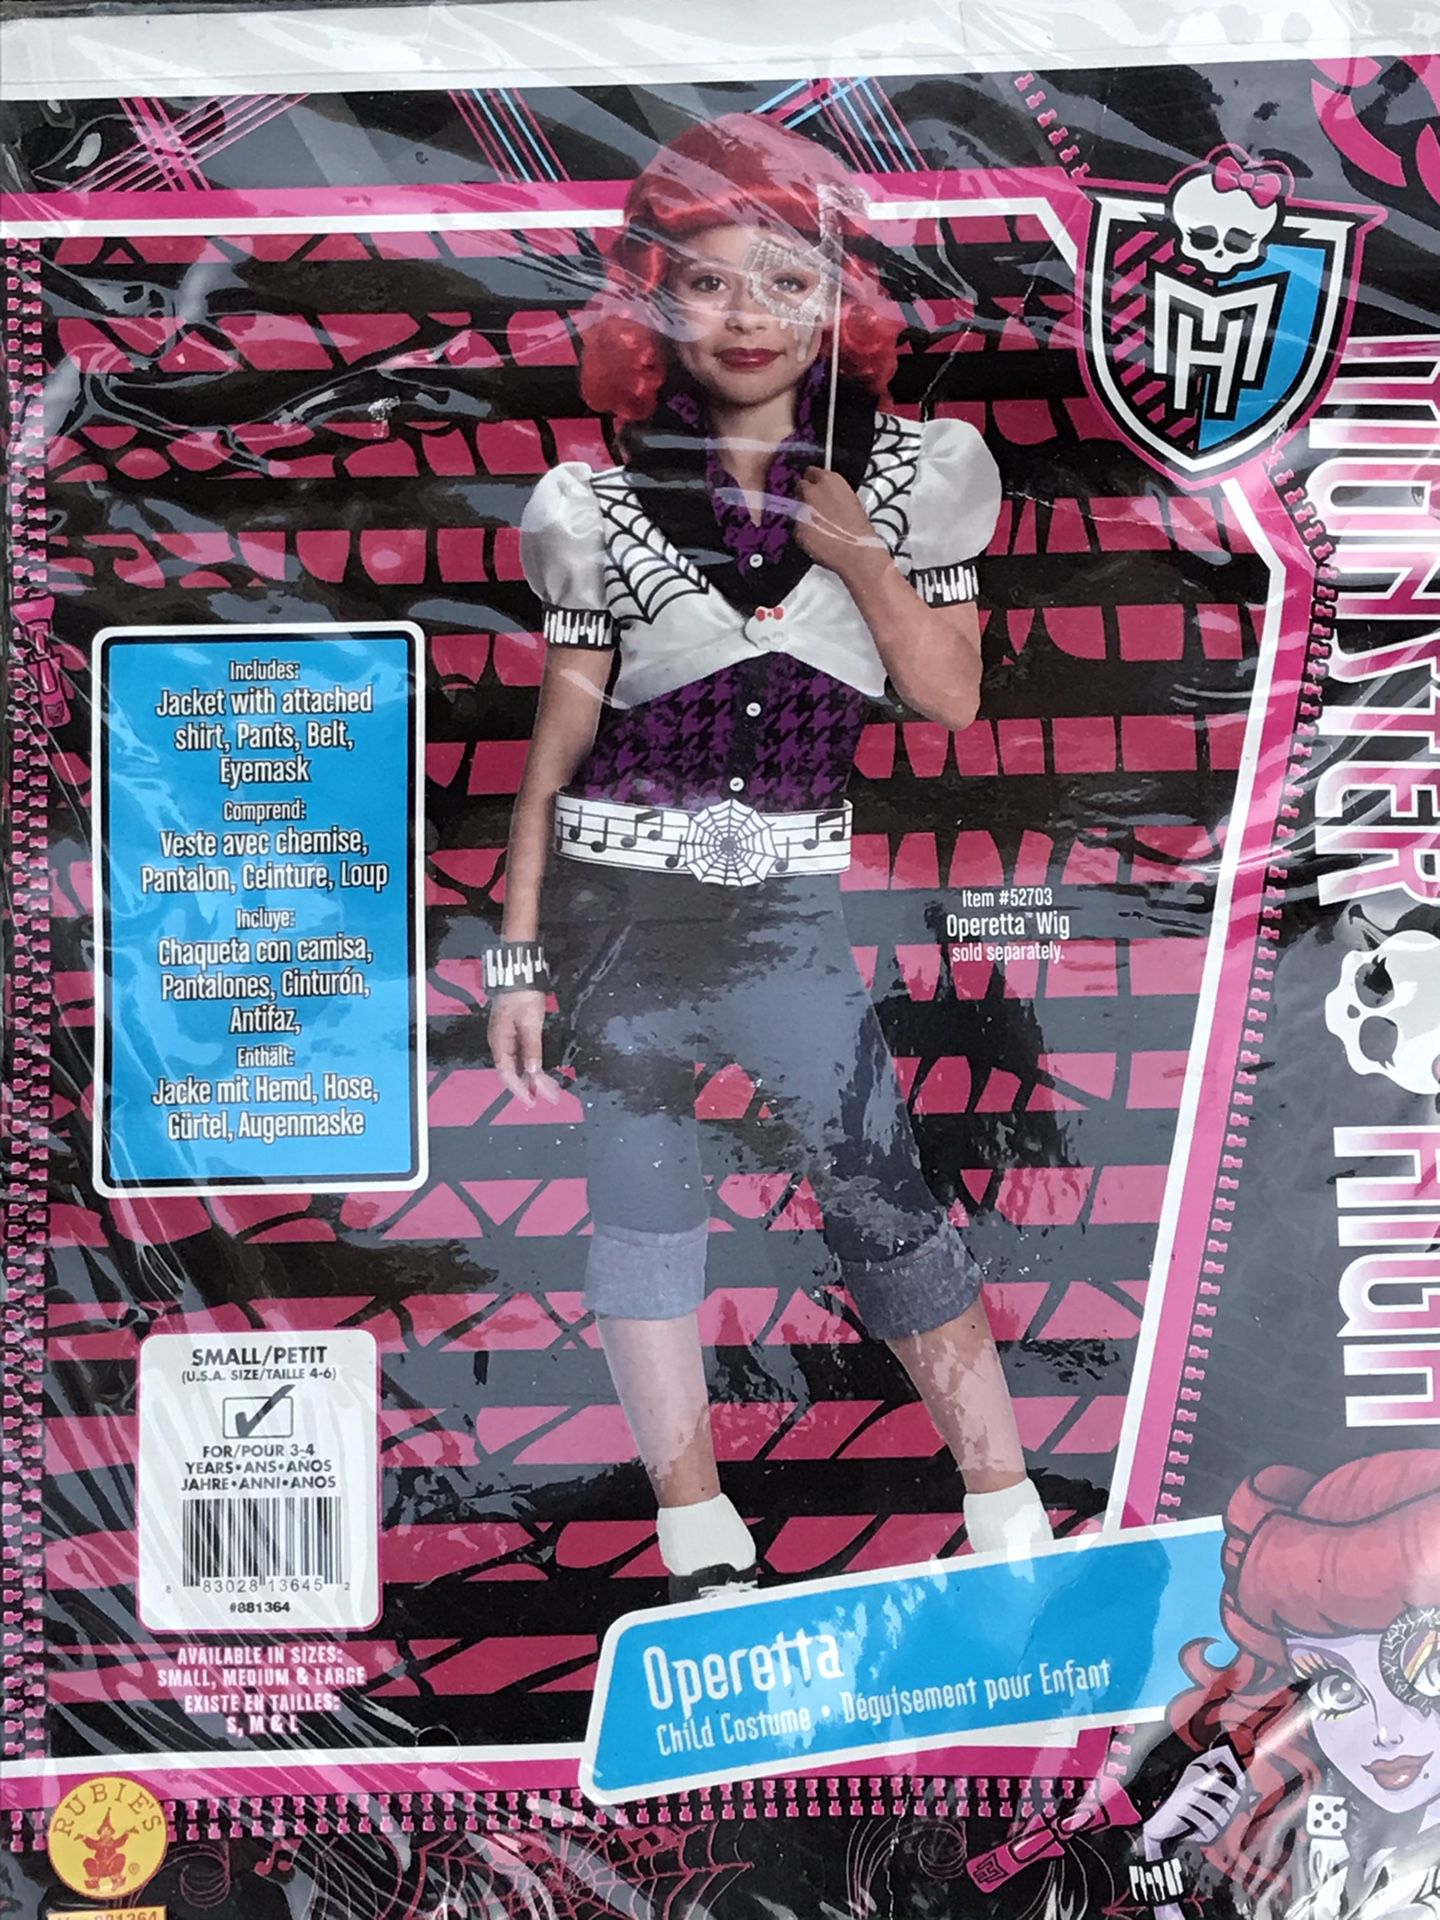 Girls size small monster high Costume